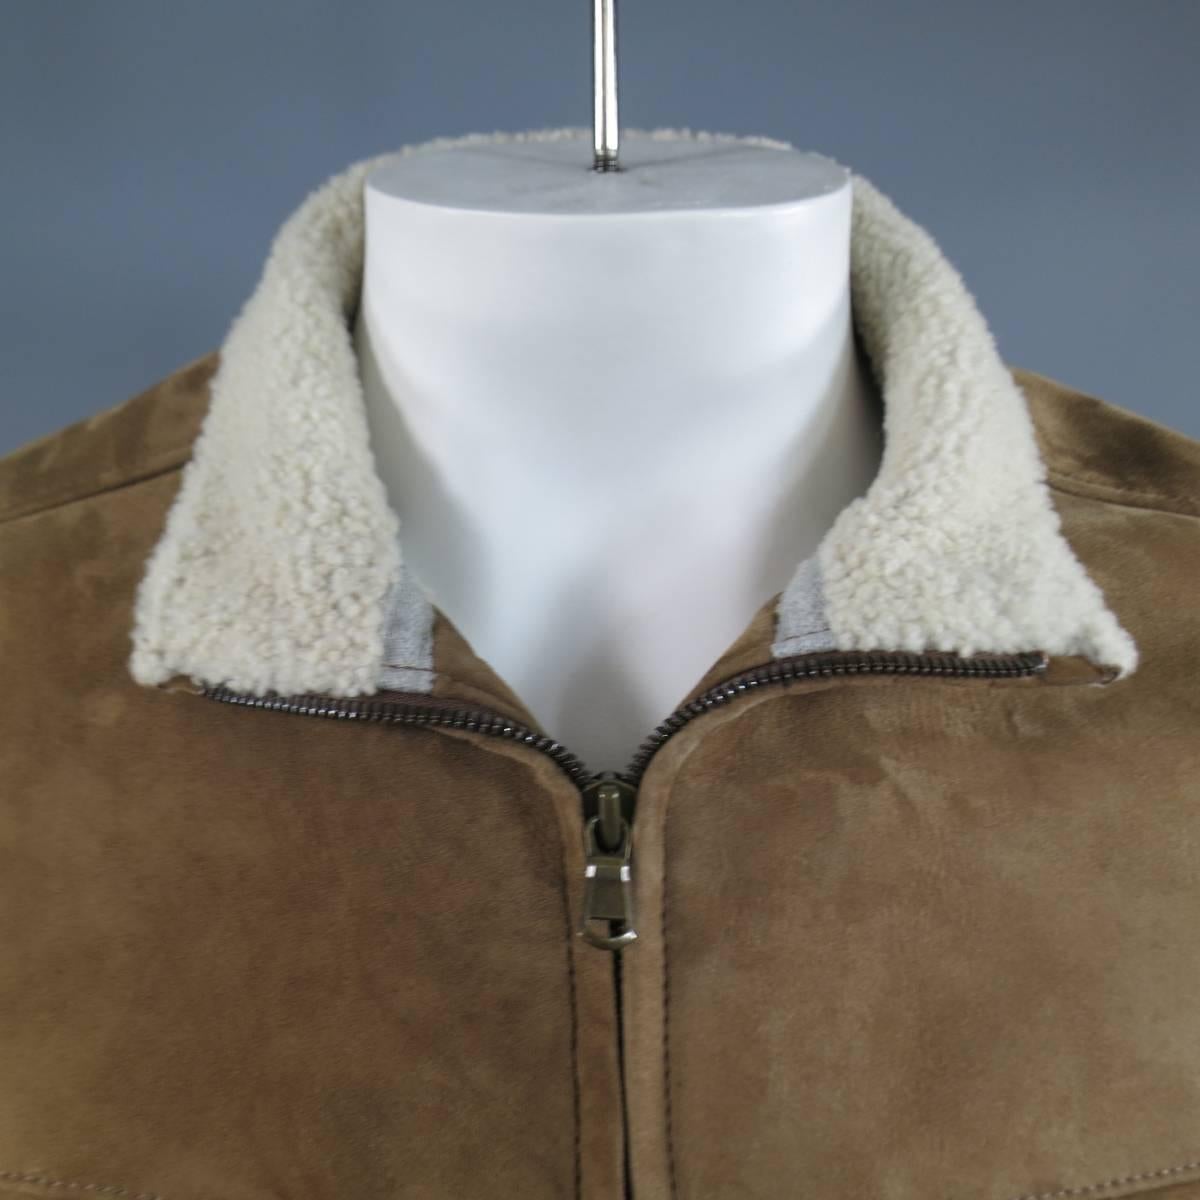 Classic BRUNELLO CUCINELLI jacket comes in a light beige taupe tan suede shearling and features a high neck, zip up closure, double zip breast pockets, and slit pockets on front. Made in Italy.

Reatails at $5,800.00.

Excellent Pre-Owned